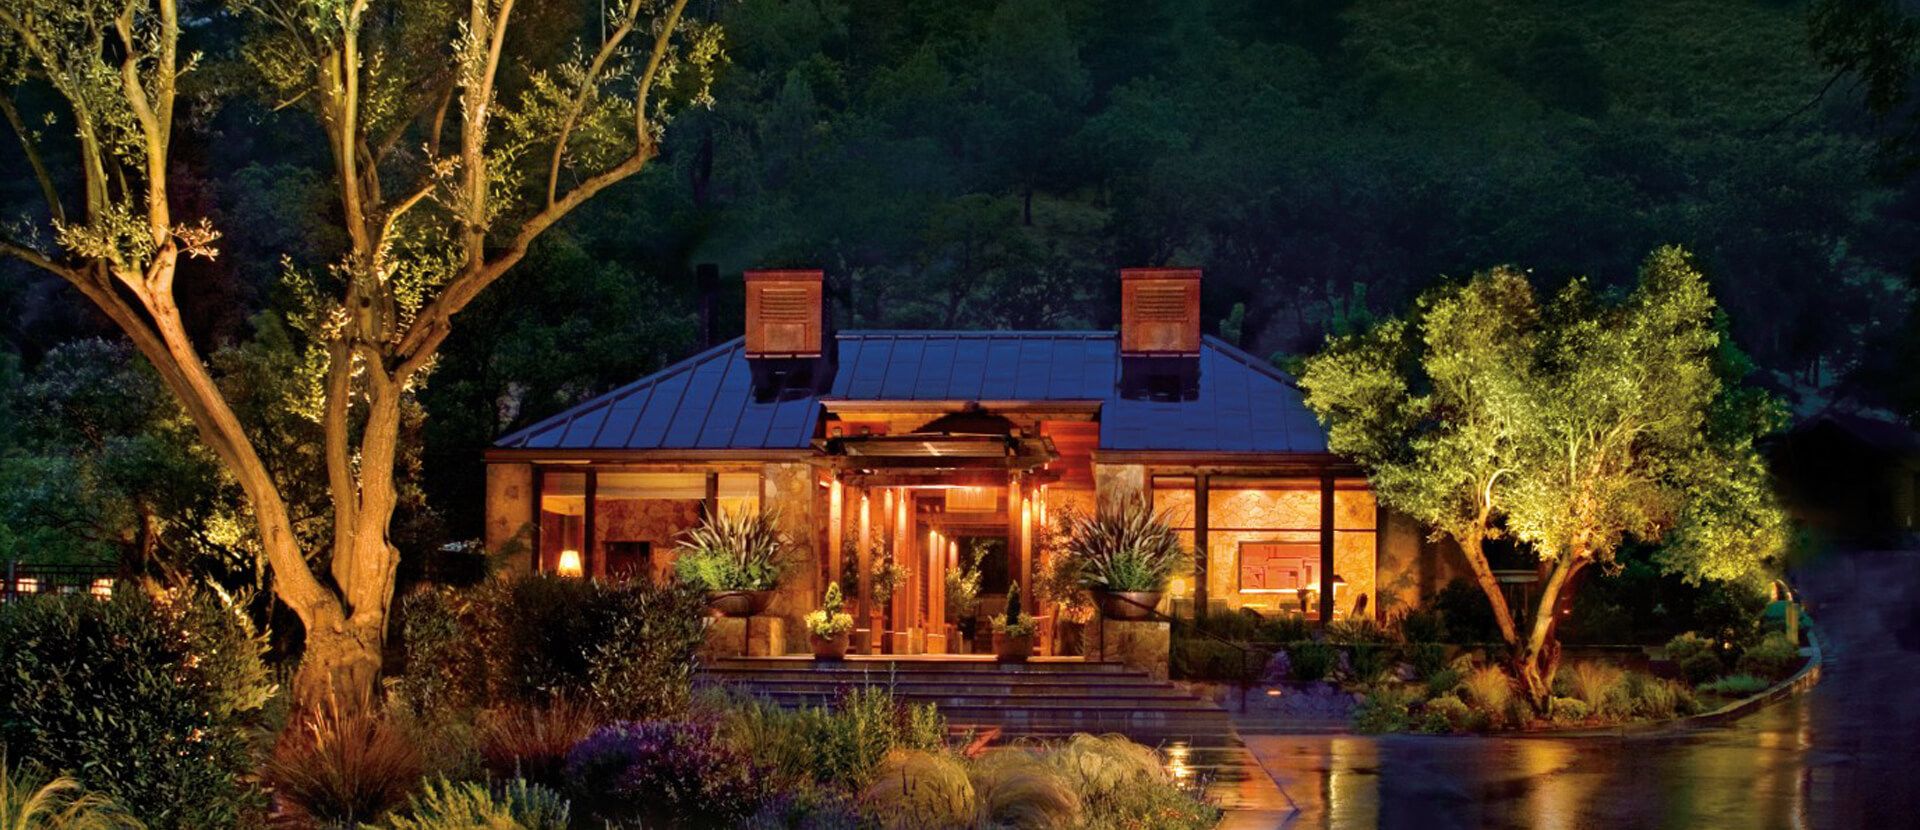 Calistoga Ranch, Auberge Resorts Collection